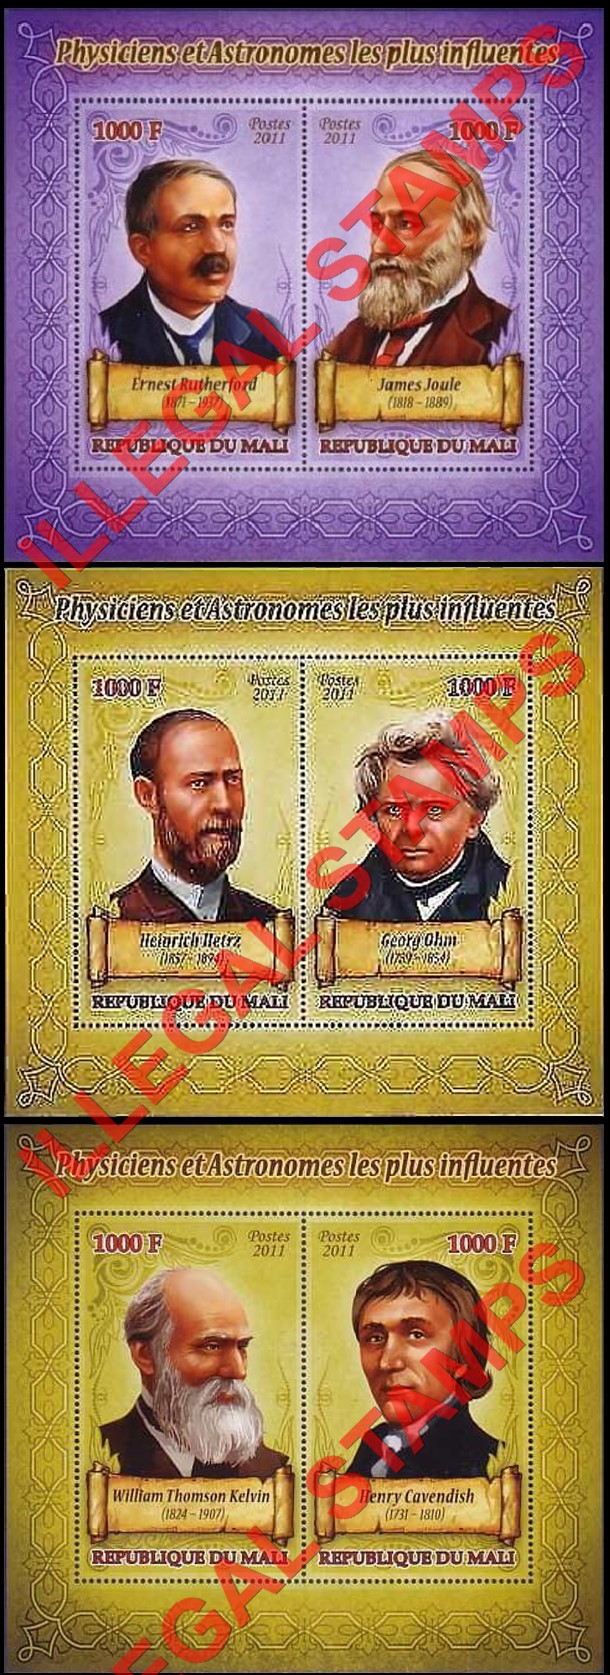 Mali 2011 Physicians and Astronomers Illegal Stamp Souvenir Sheets of 2 (Part 4)